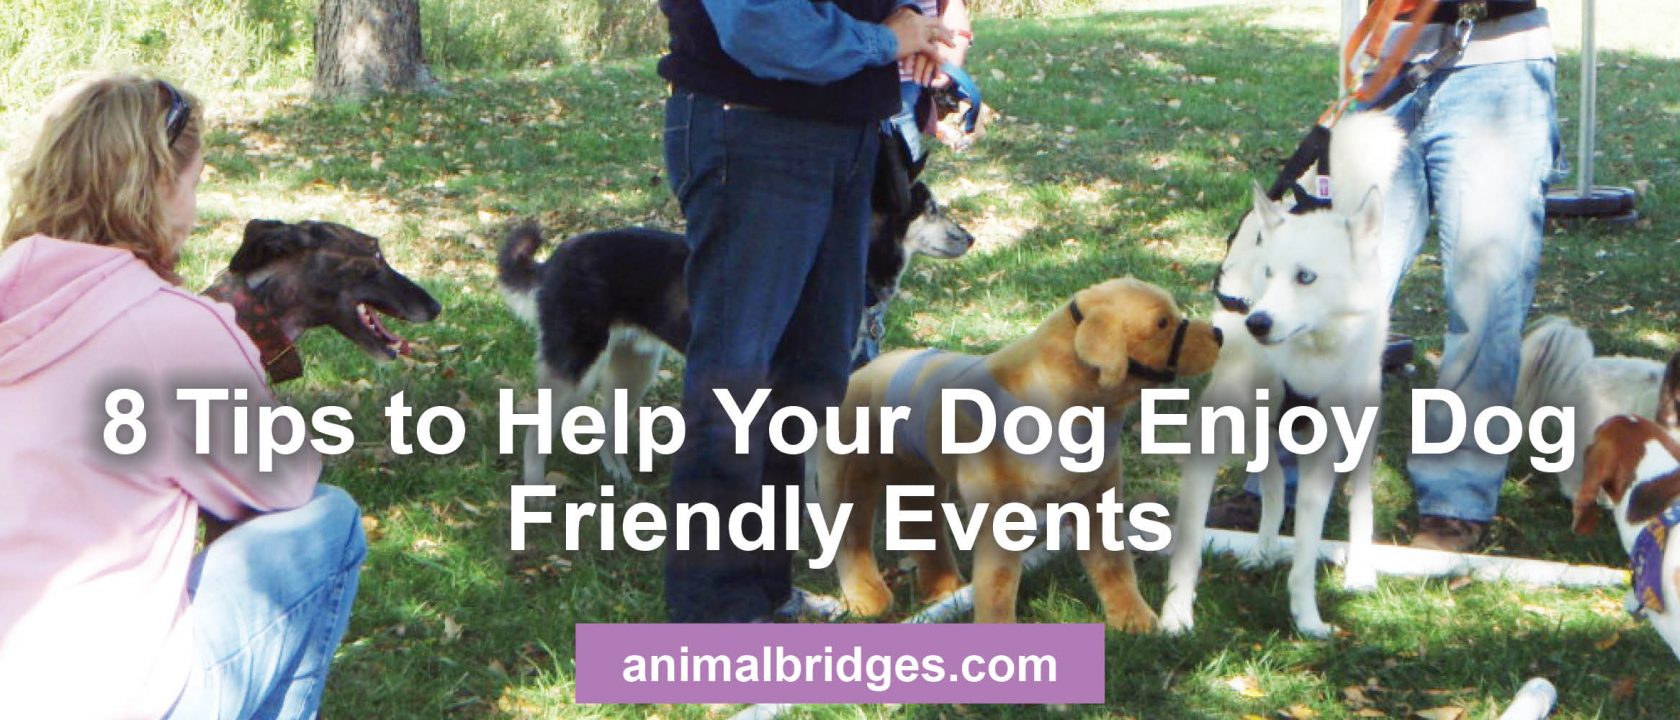 8 tips to help your dog enjoy dog friendly events